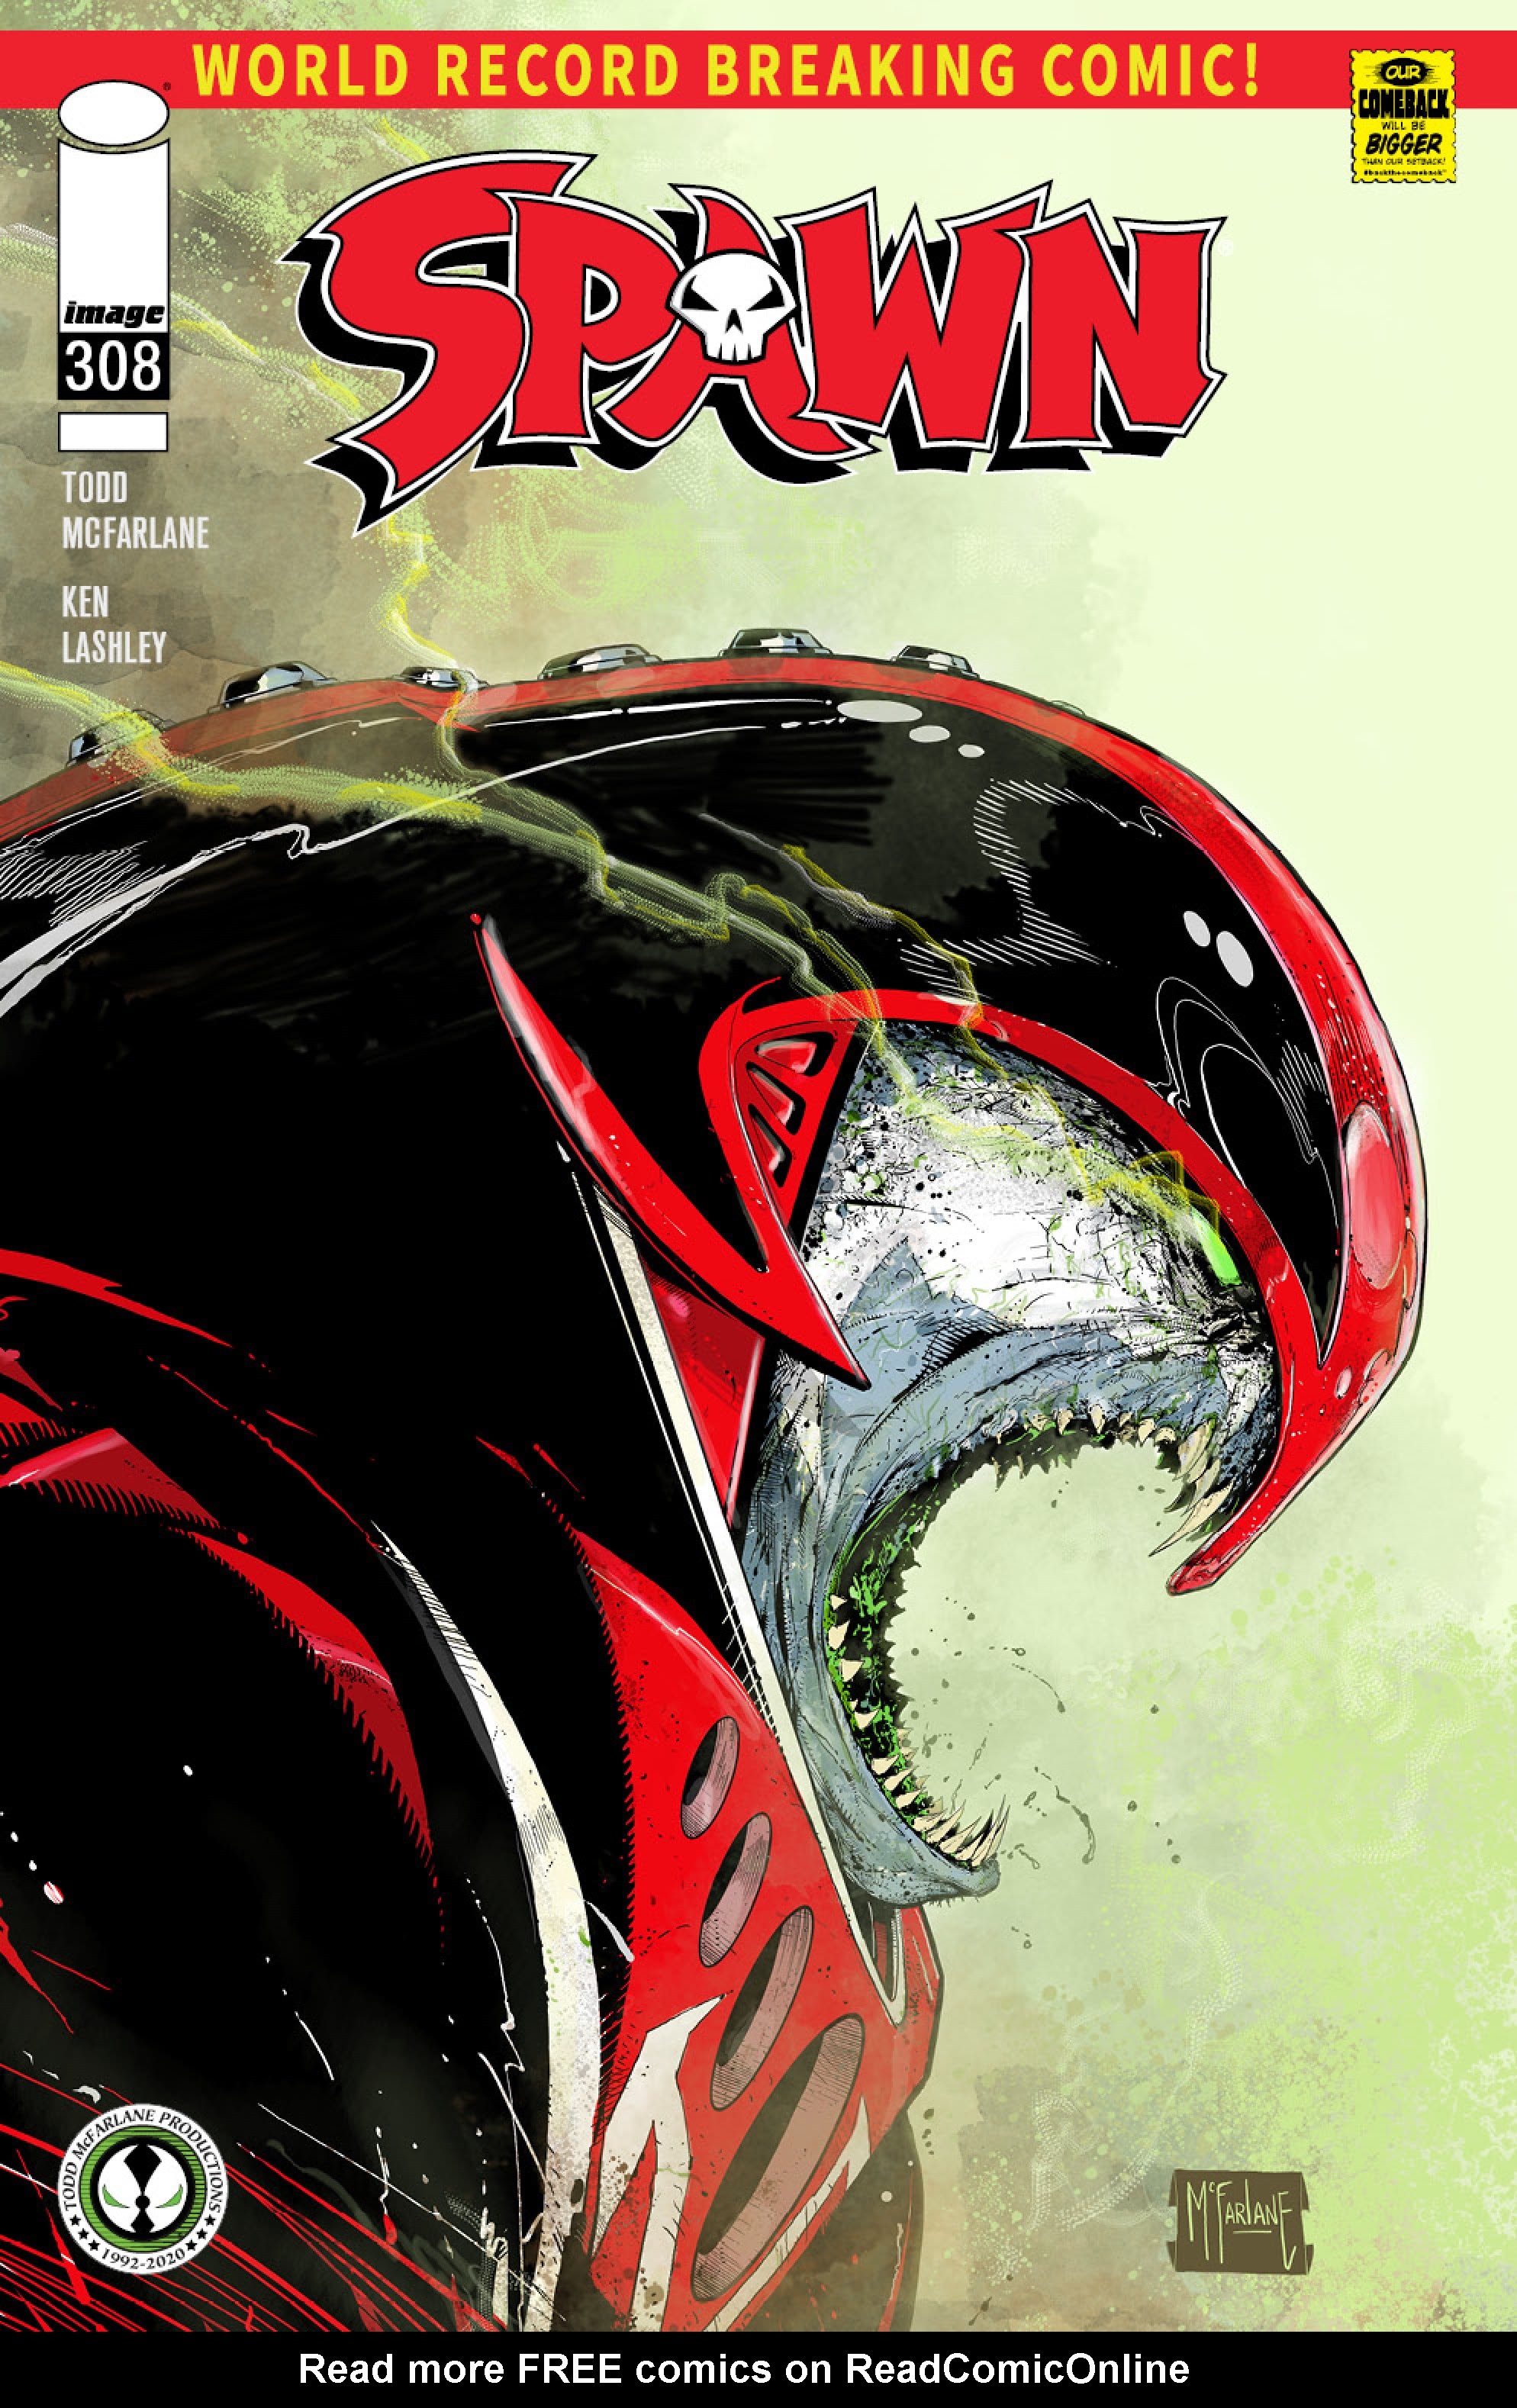 Read online Spawn comic -  Issue #308 - 1